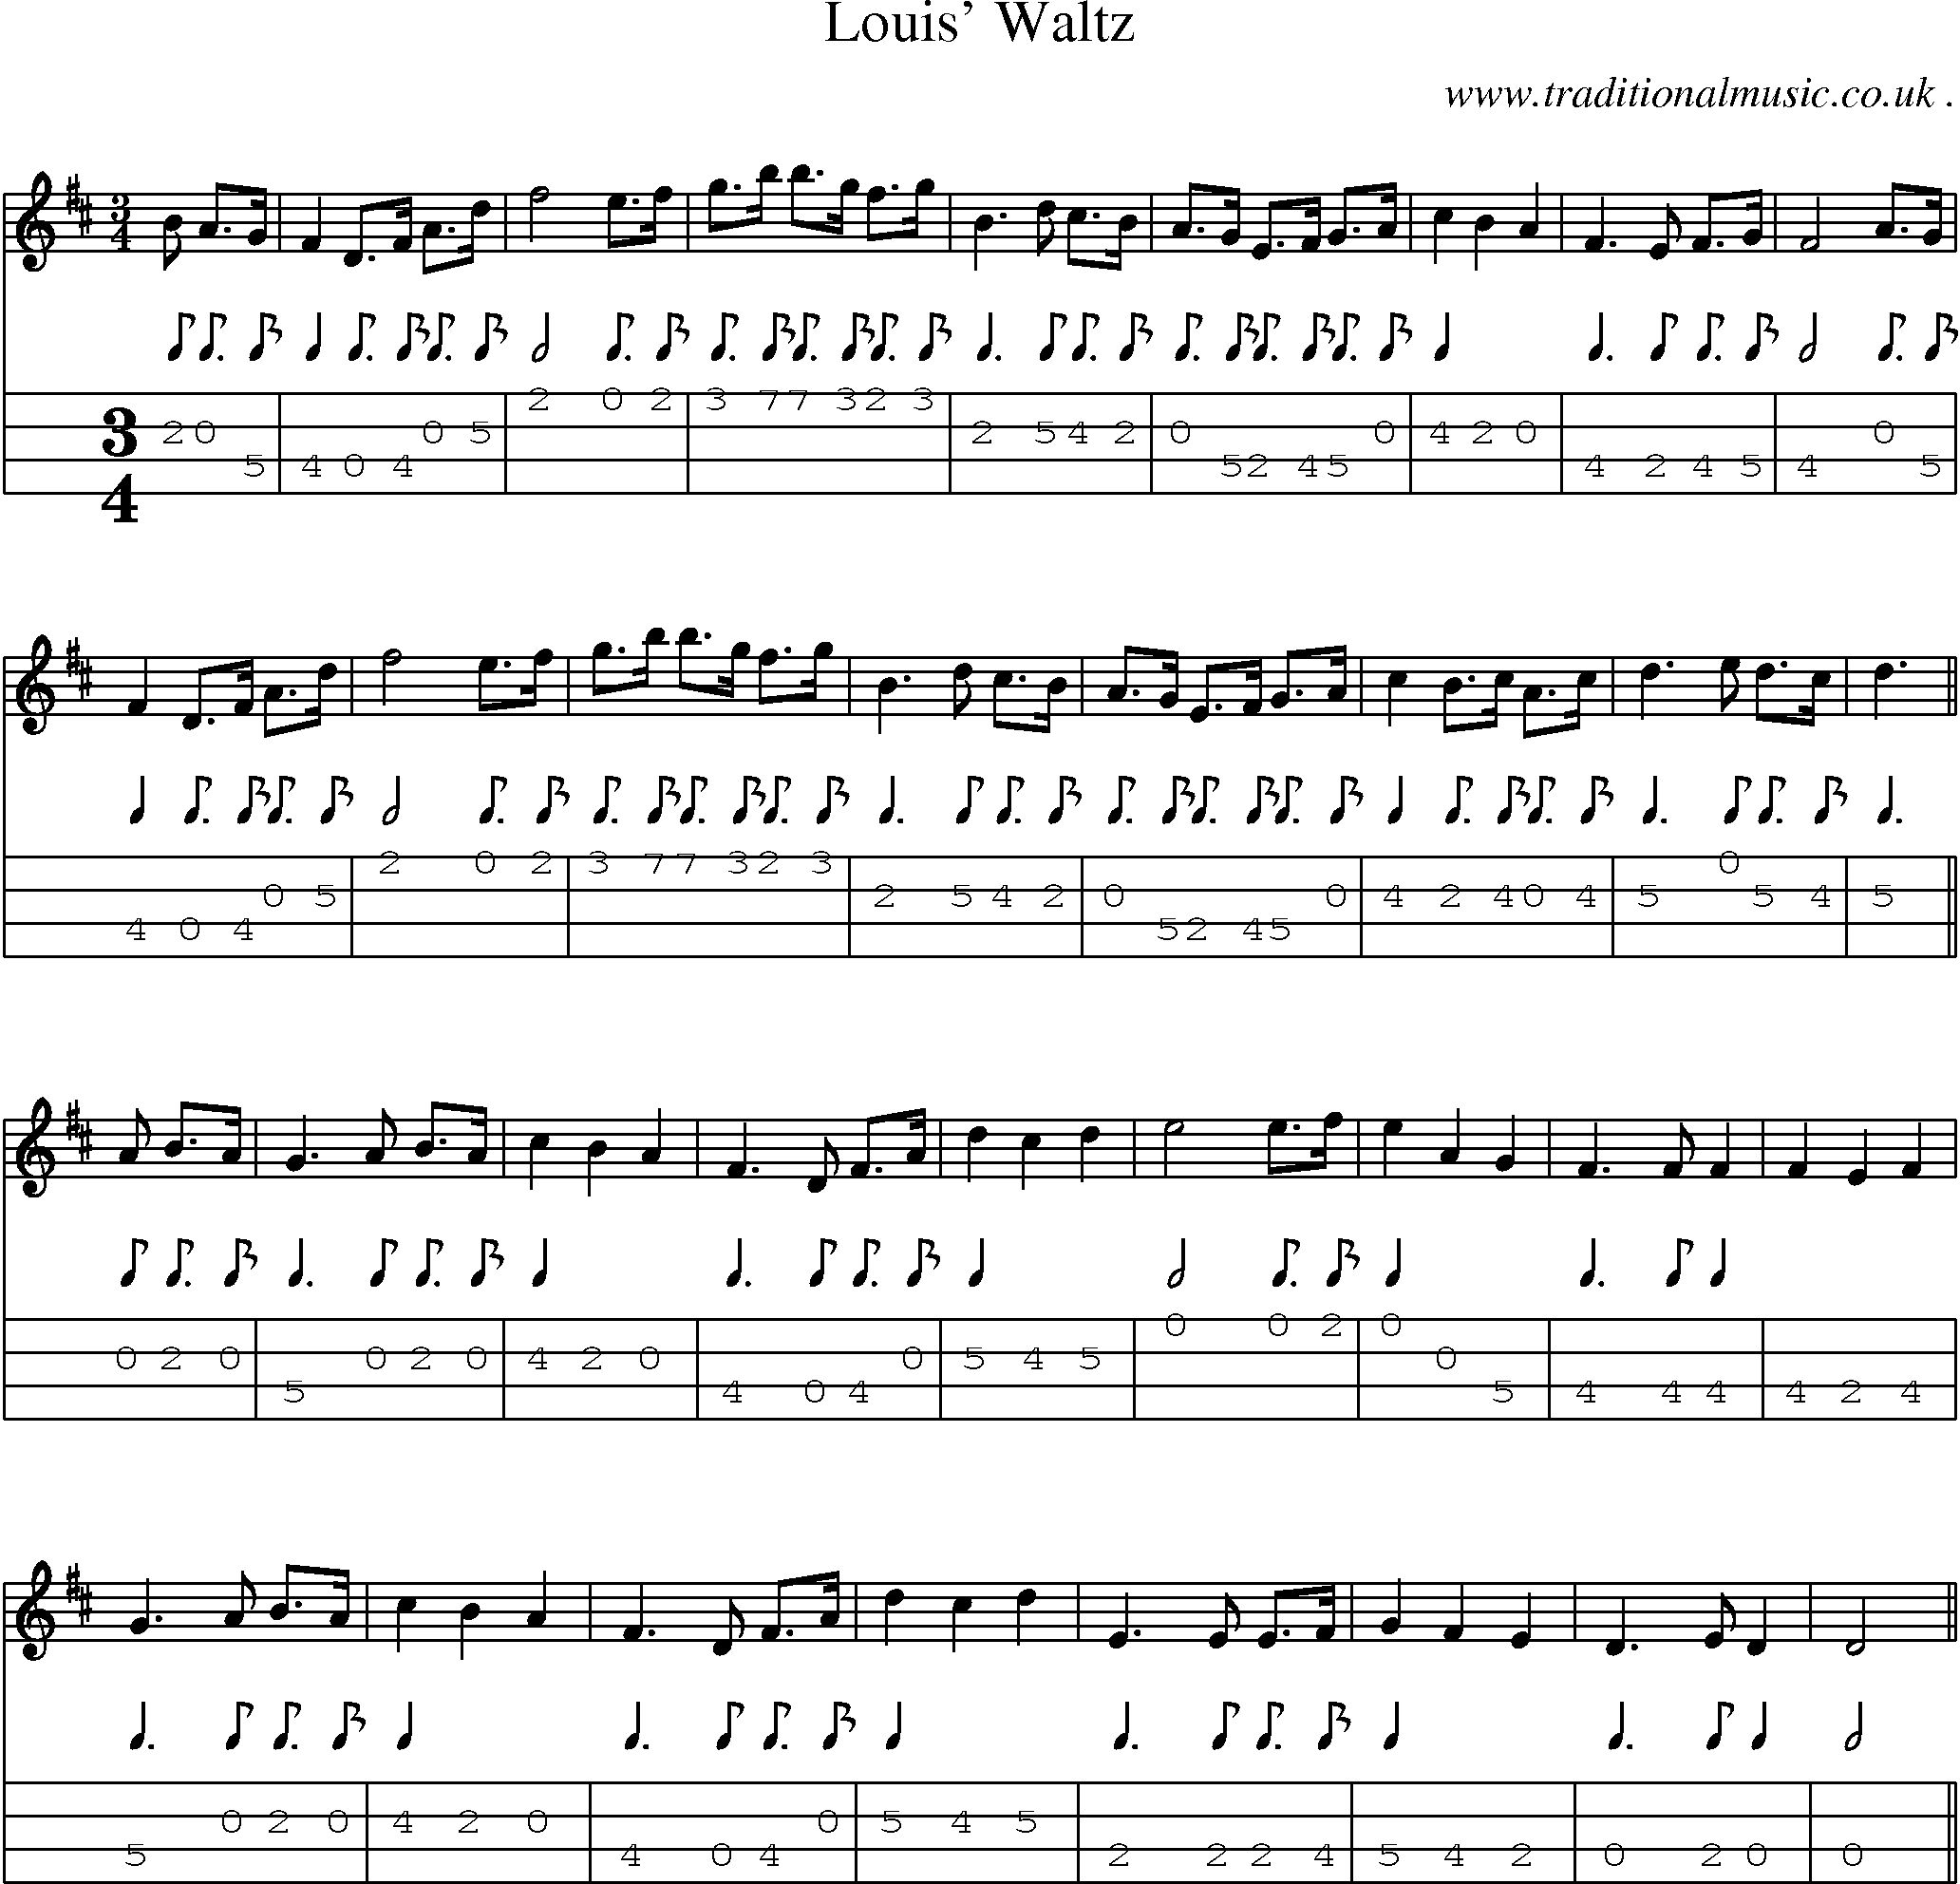 Music Score and Guitar Tabs for Louis Waltz